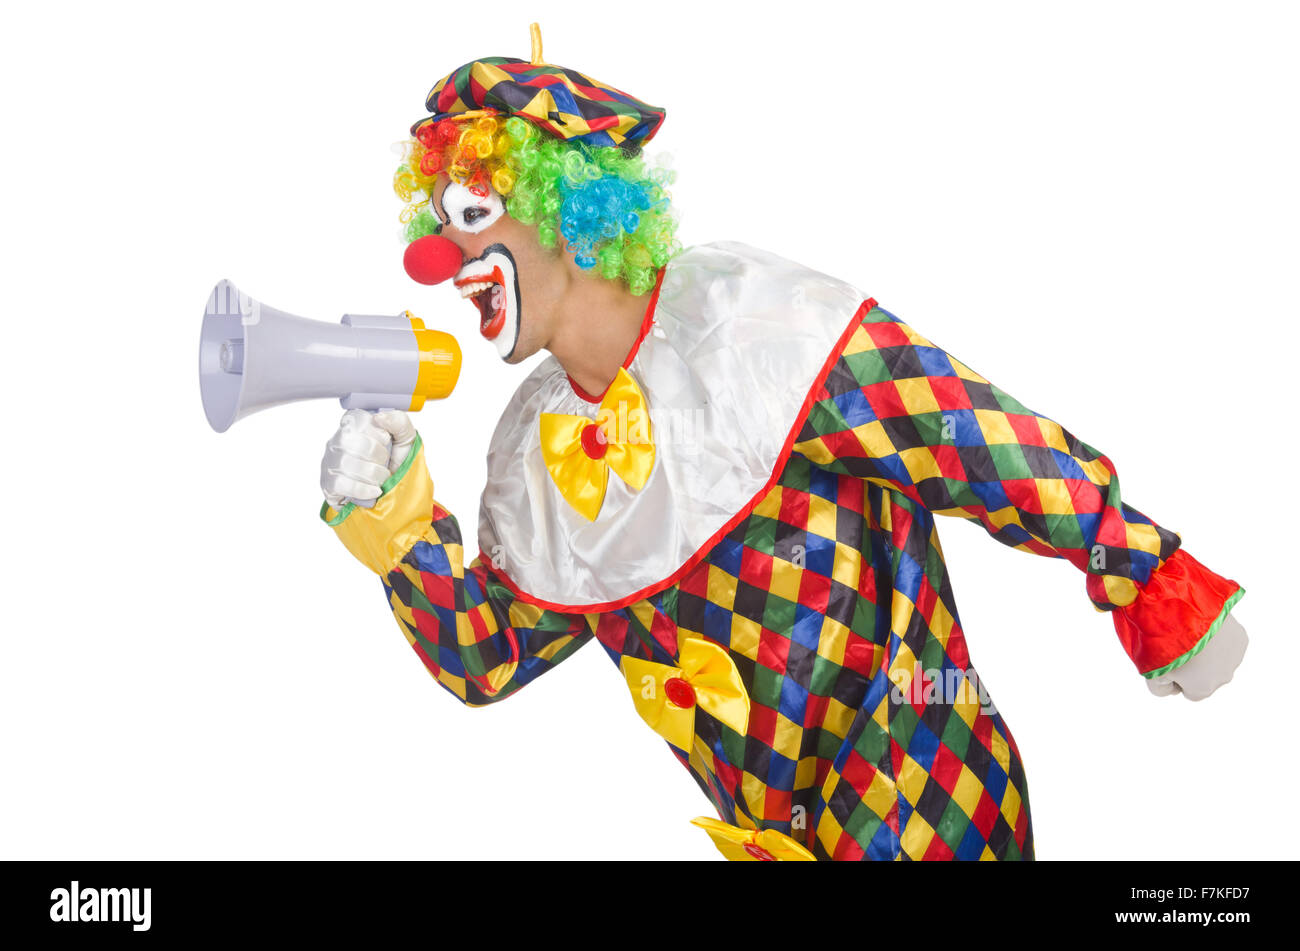 Clown horn Cut Out Stock Images & Pictures - Alamy